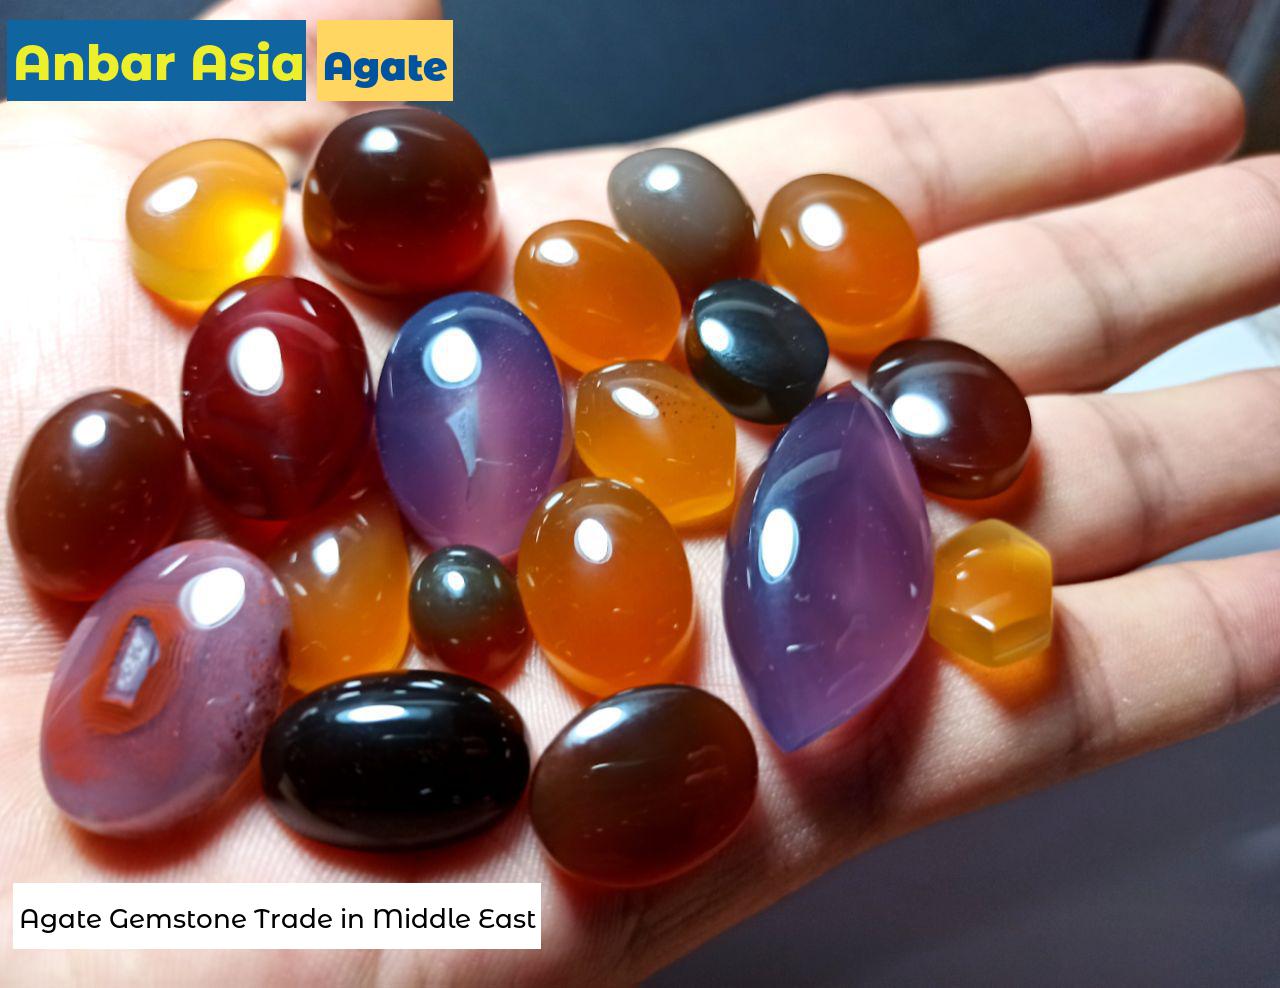 Agate Gemstone Trade in Middle East